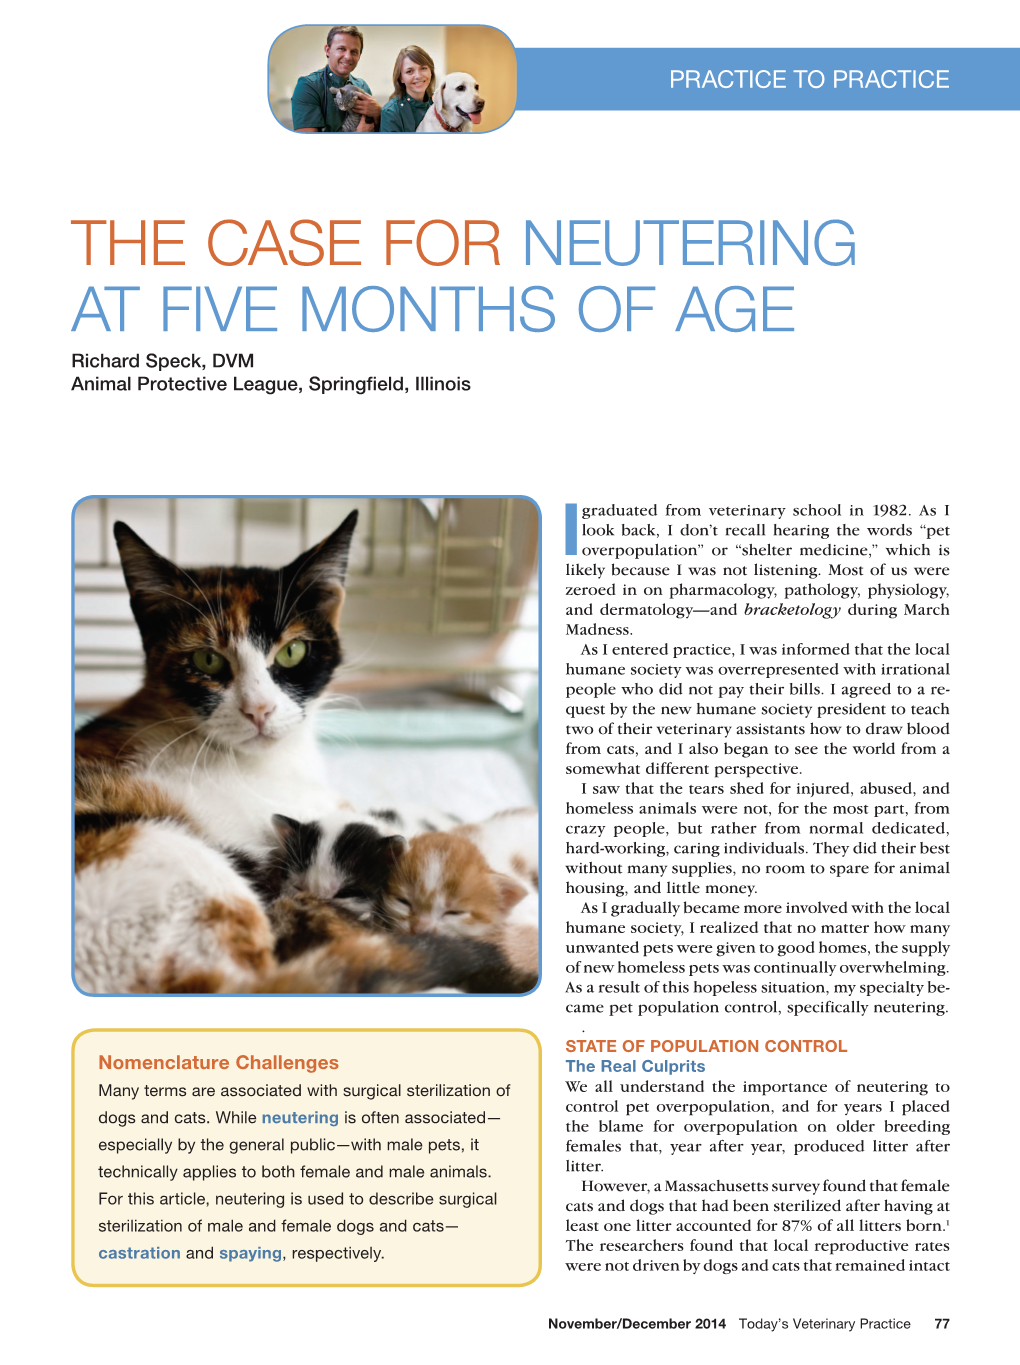 The Case for Neutering at Five Months of Age Richard Speck, DVM Animal Protective League, Springfield, Illinois